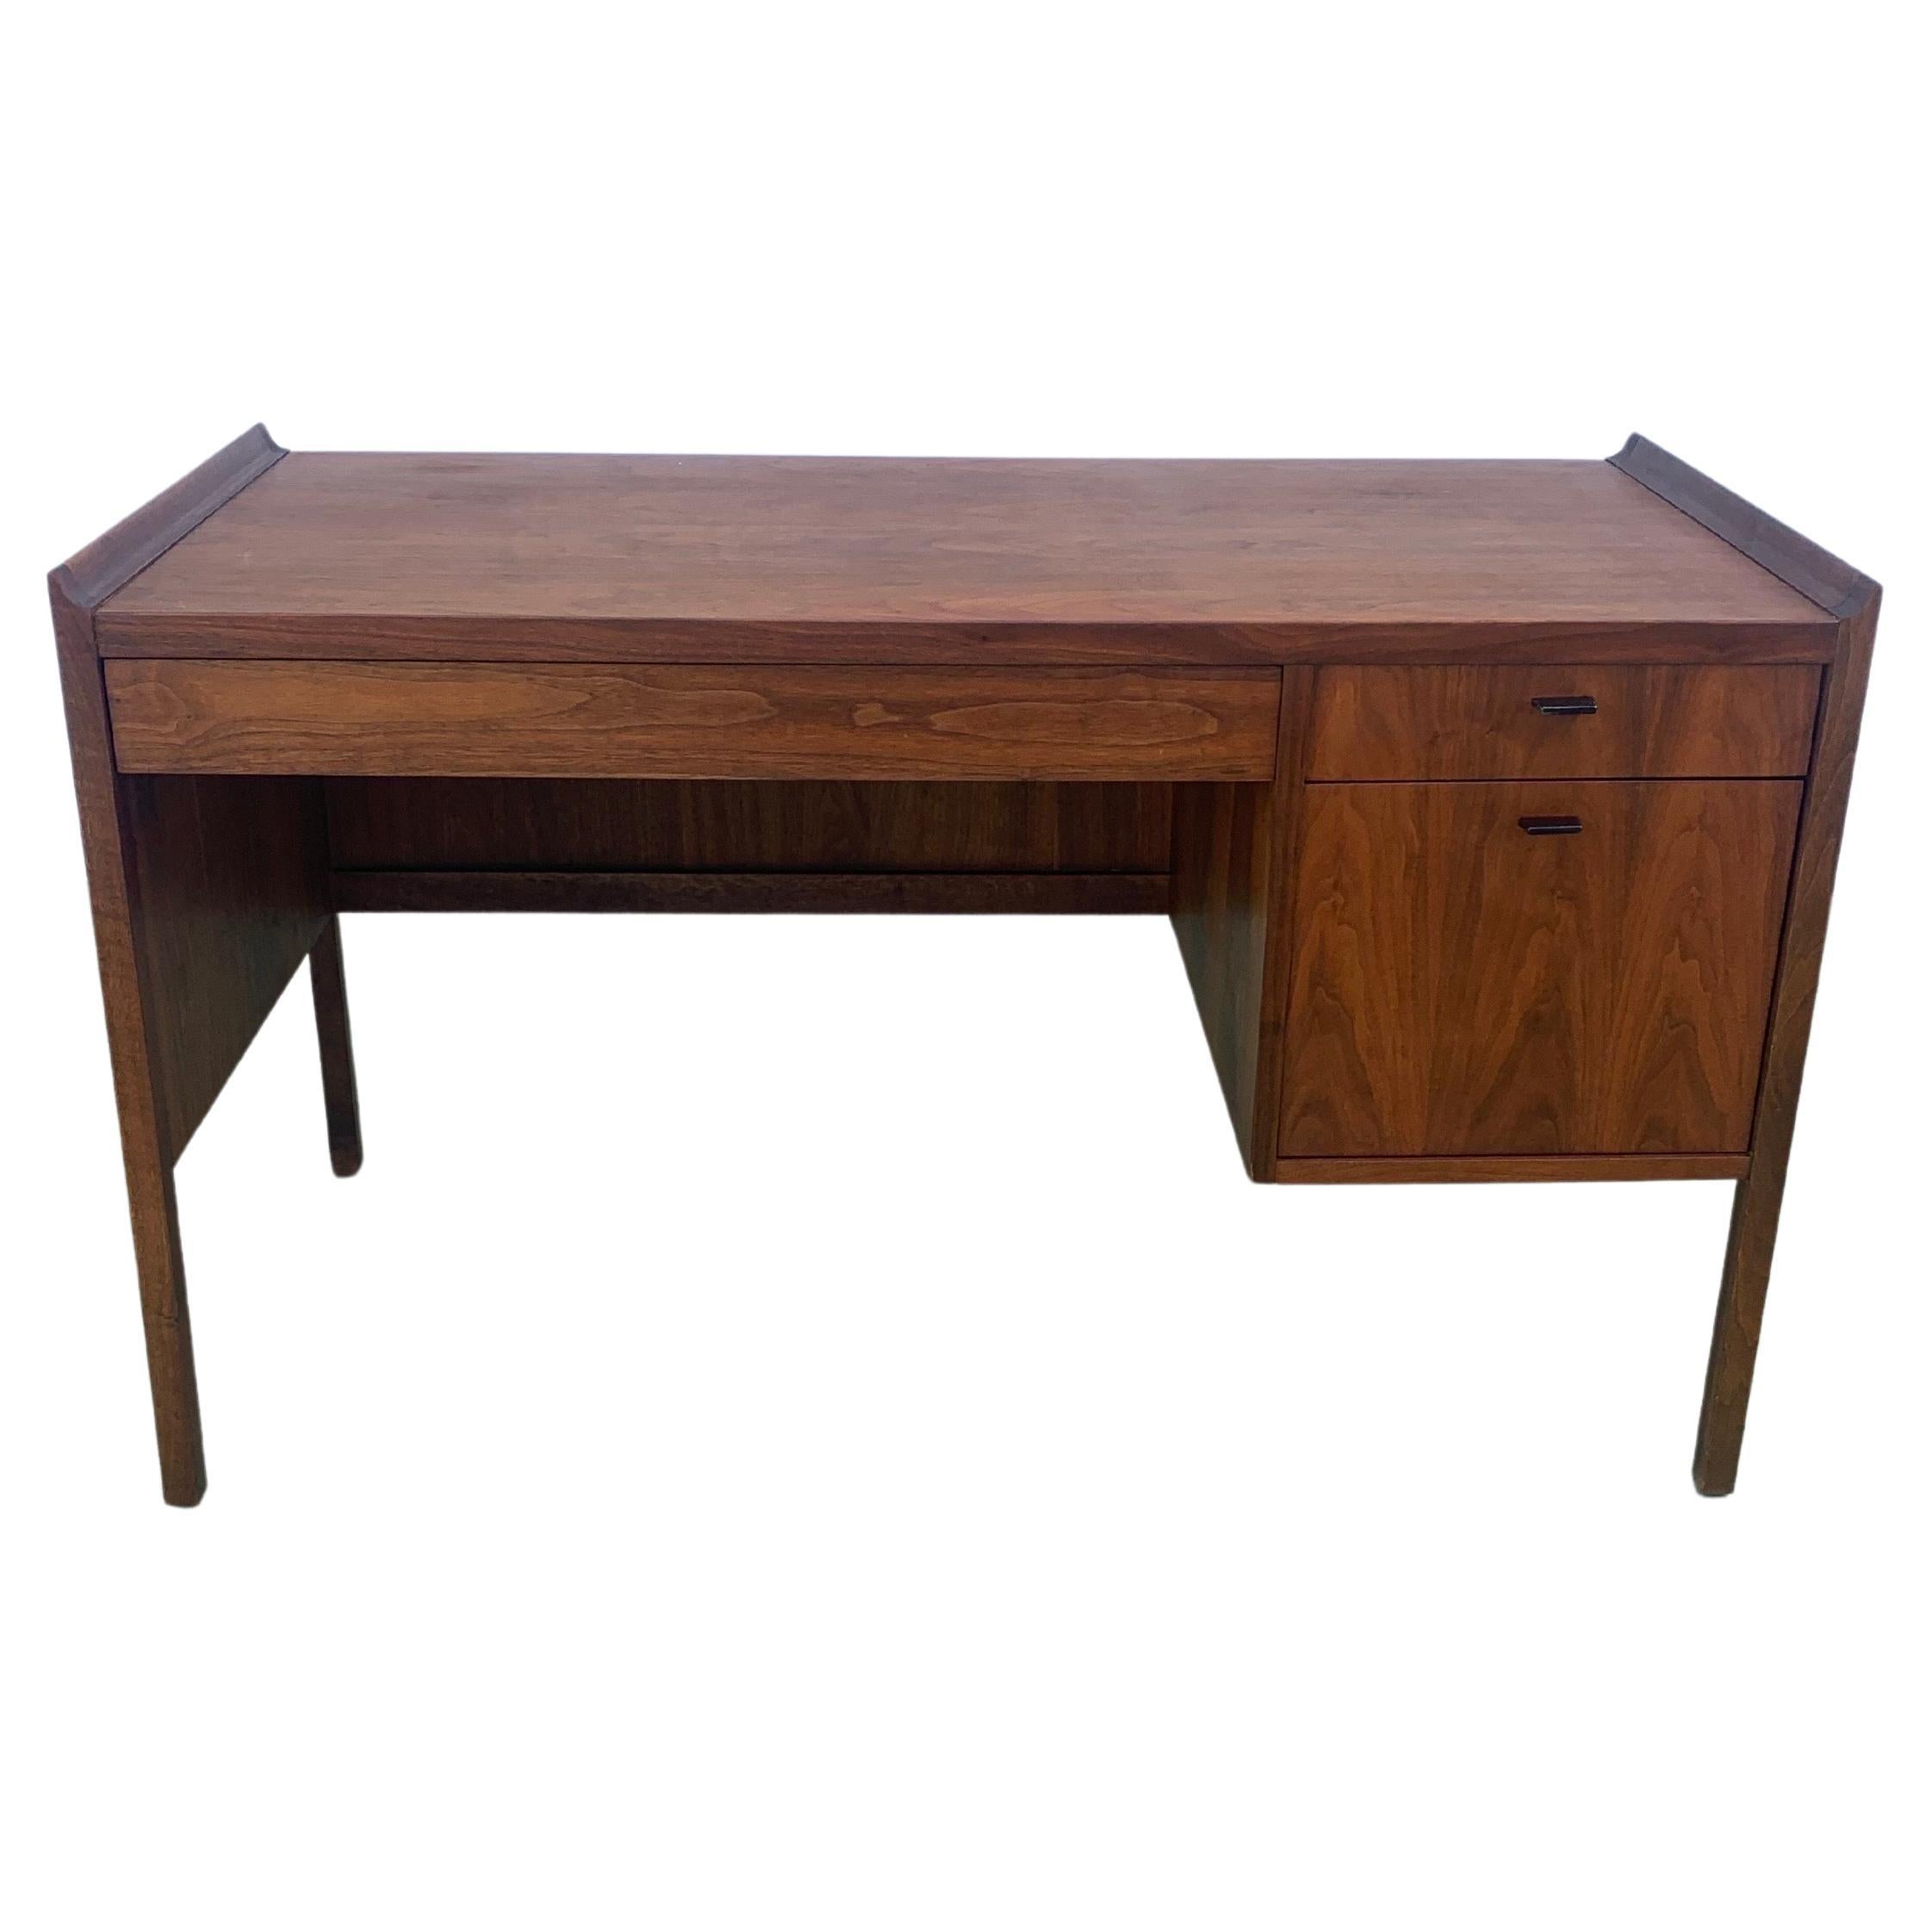 Jack Cartwright for Founders Mid Century Modern Desk in Walnut For Sale